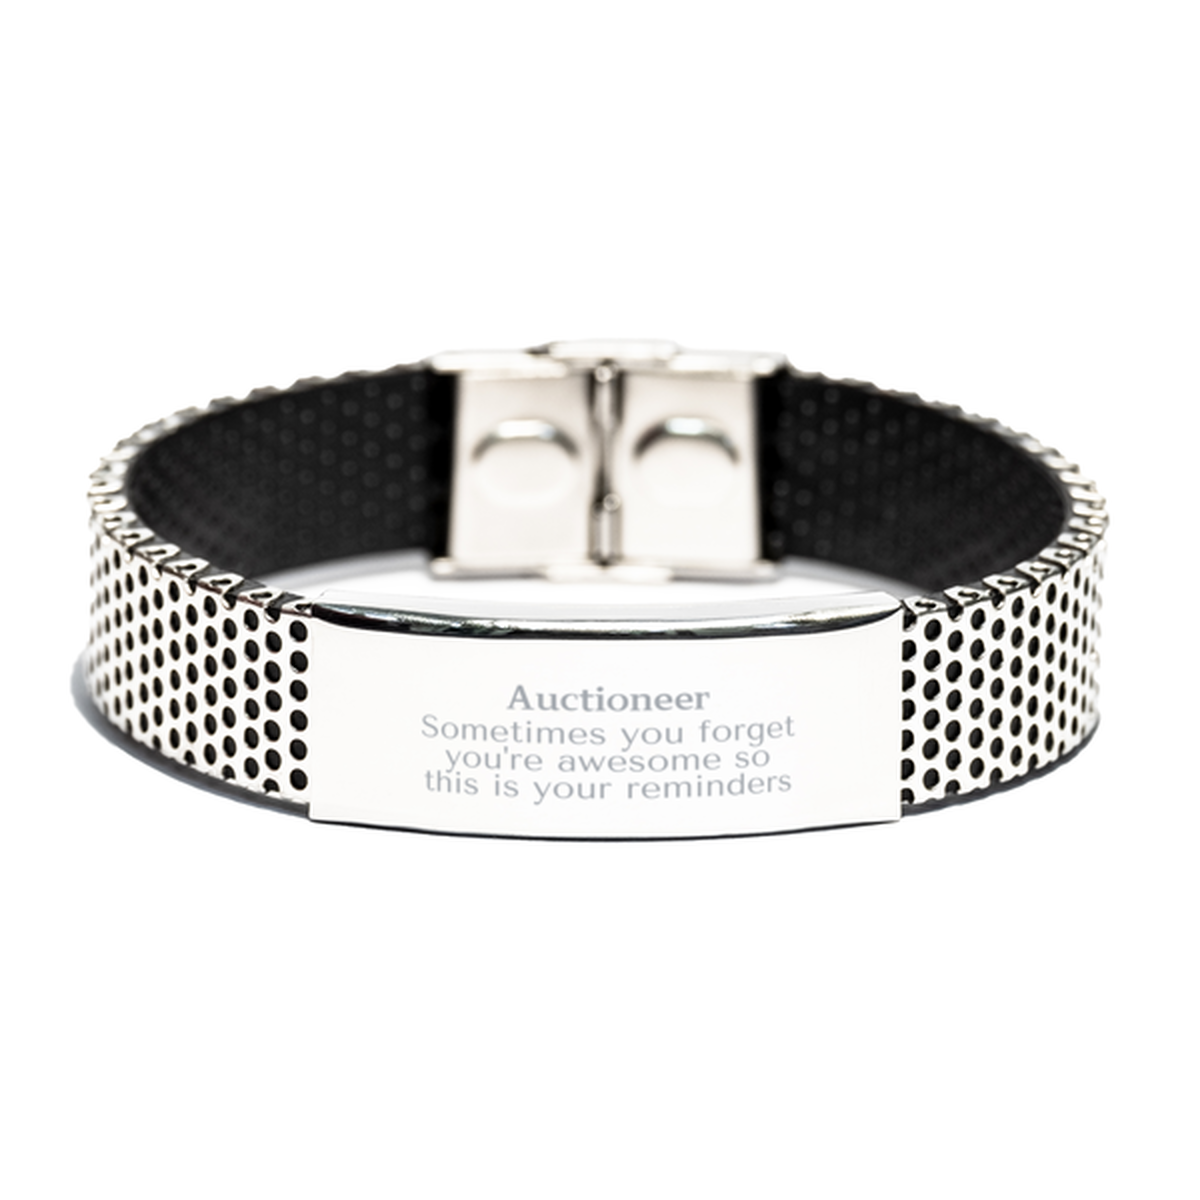 Sentimental Auctioneer Stainless Steel Bracelet, Auctioneer Sometimes you forget you're awesome so this is your reminders, Graduation Christmas Birthday Gifts for Auctioneer, Men, Women, Coworkers